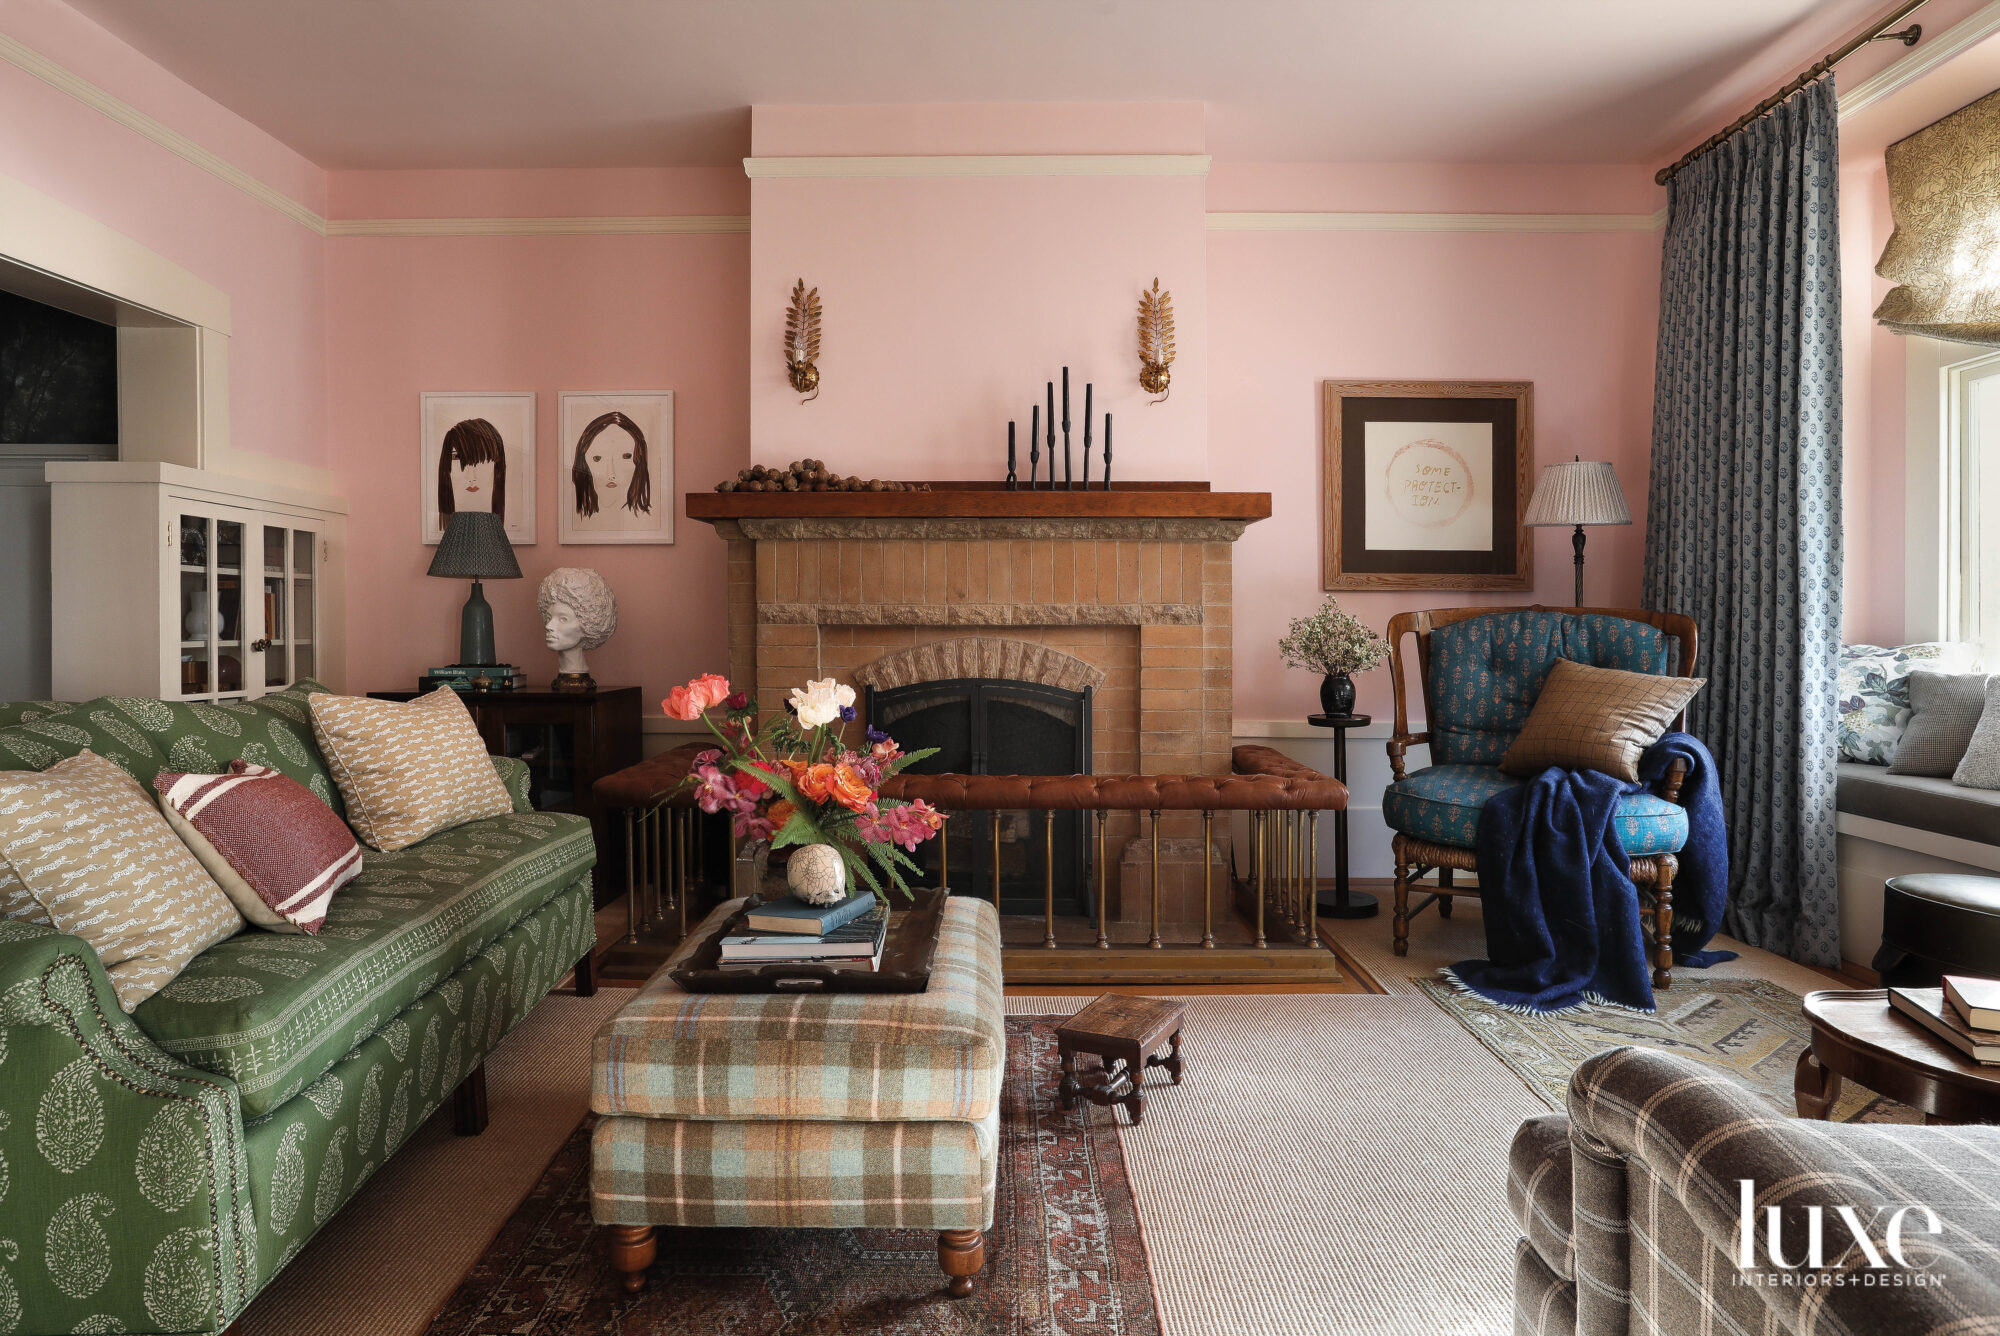 The living room is painted pink, and it has classic furniture.